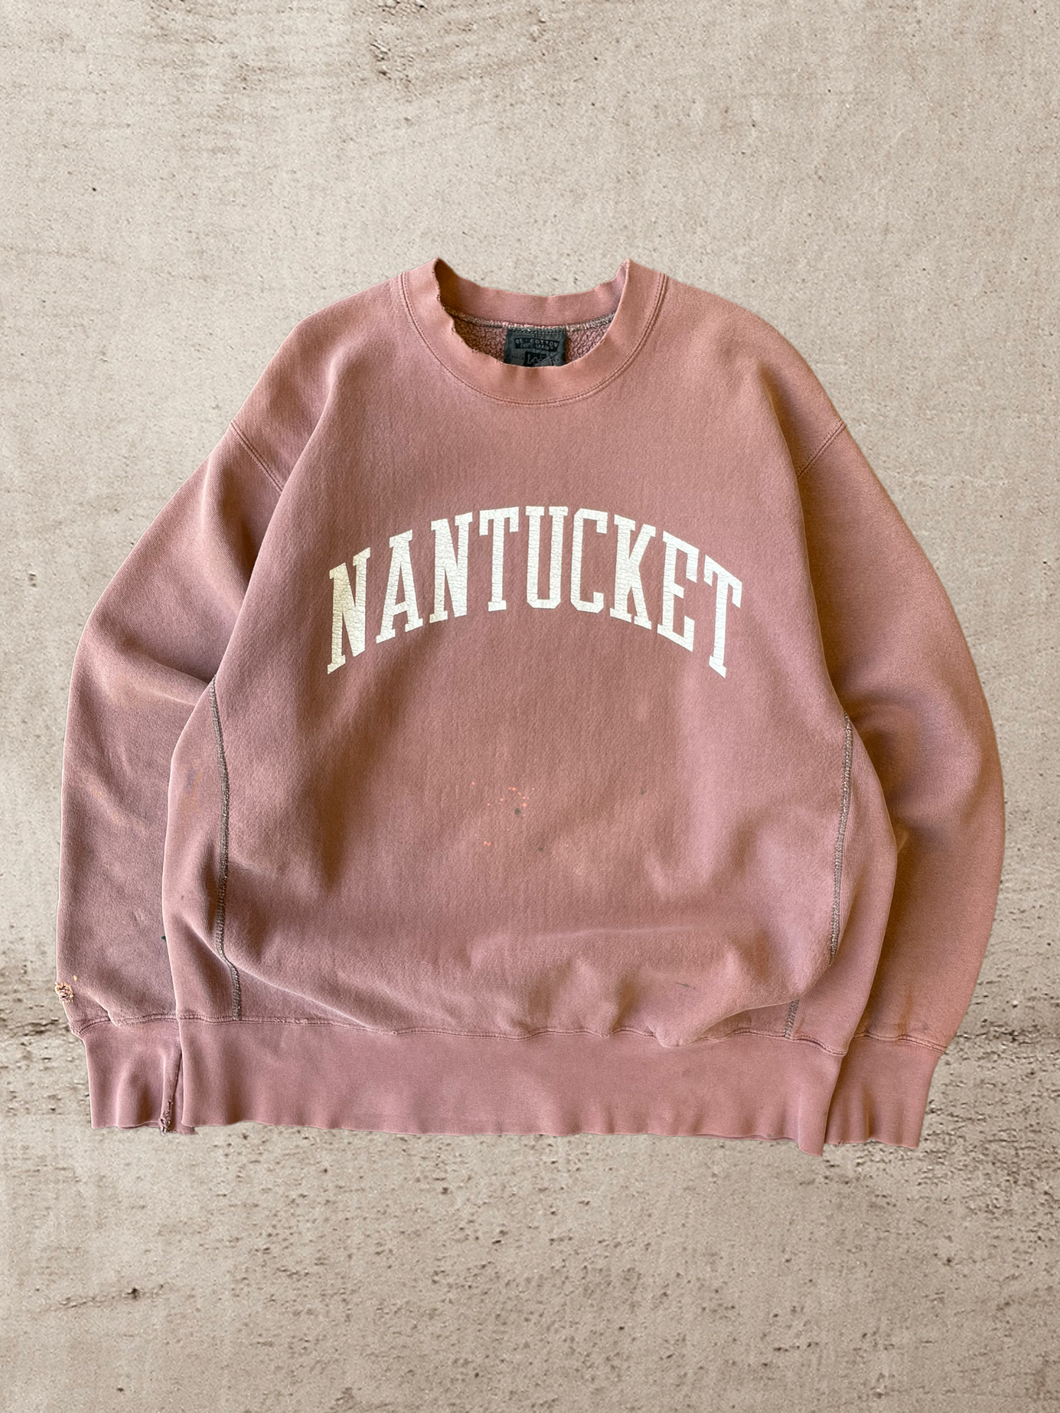 90s Faded Nantucket - X-Large